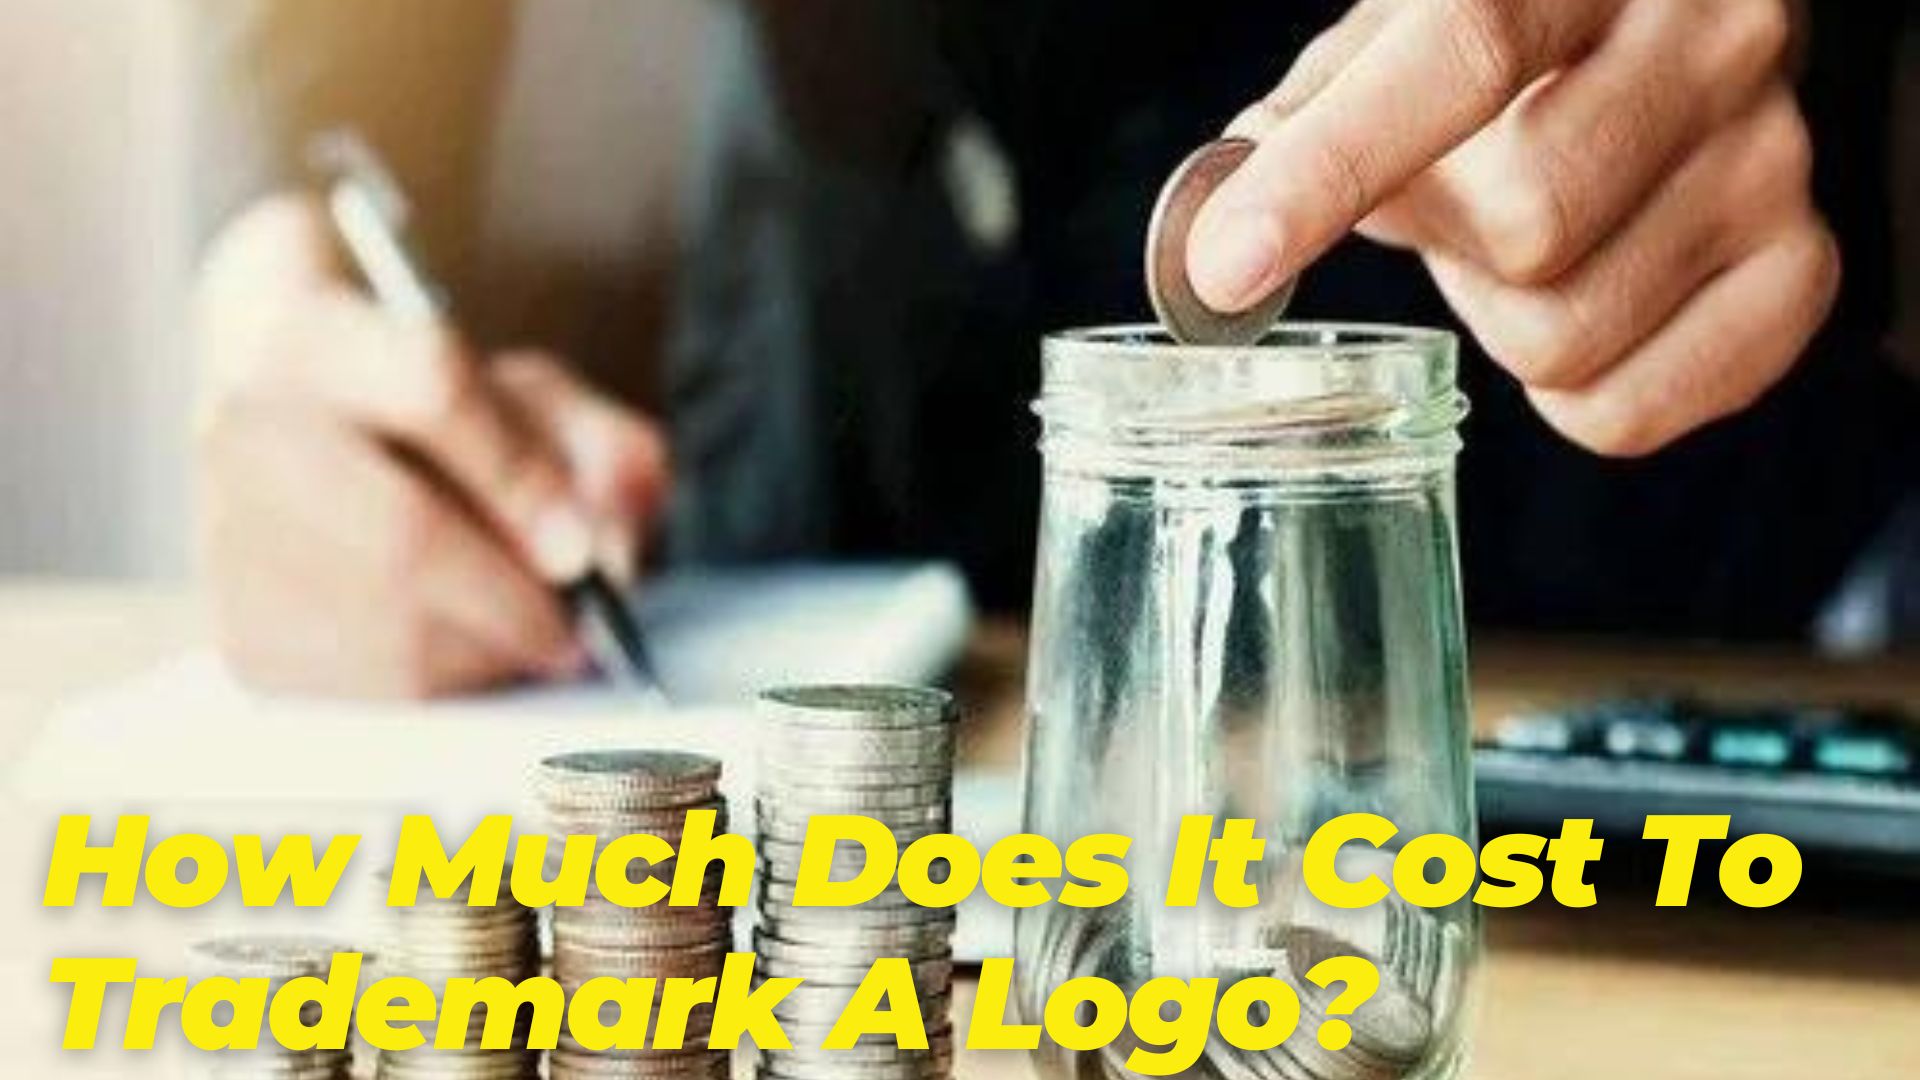 How Much Does It Cost To Trademark A Logo?